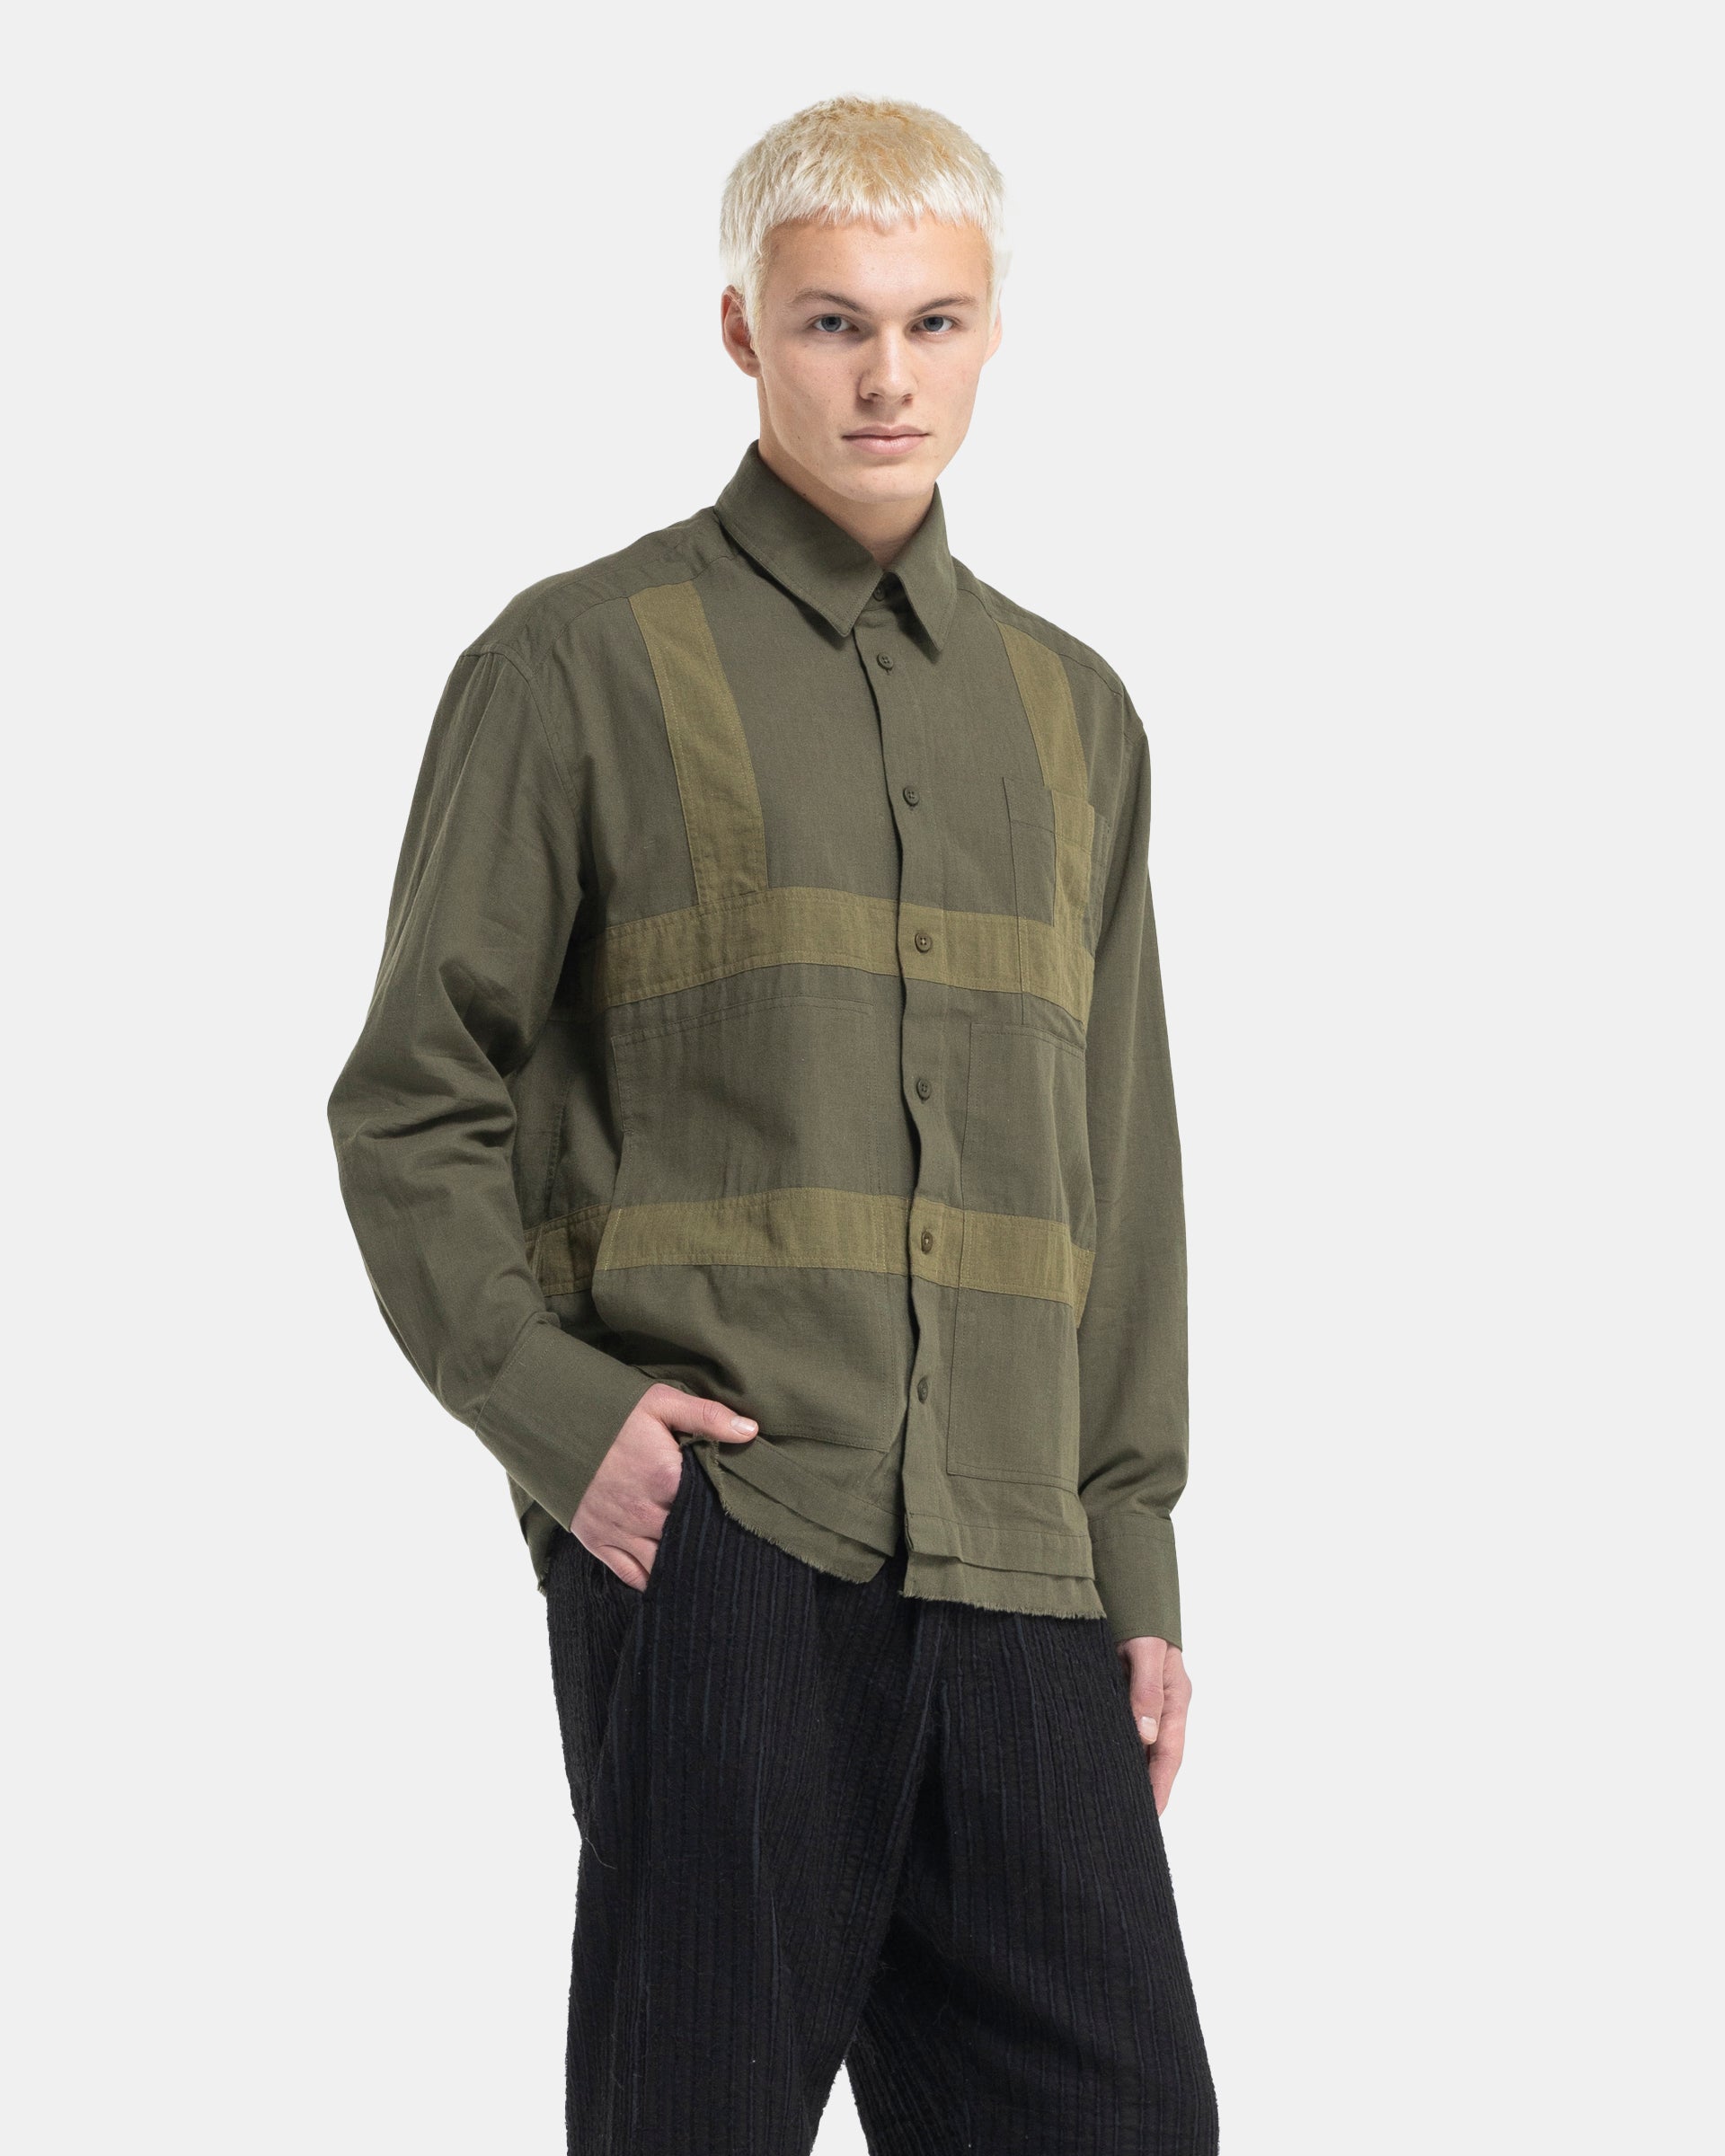 Harness Shirt in Olive